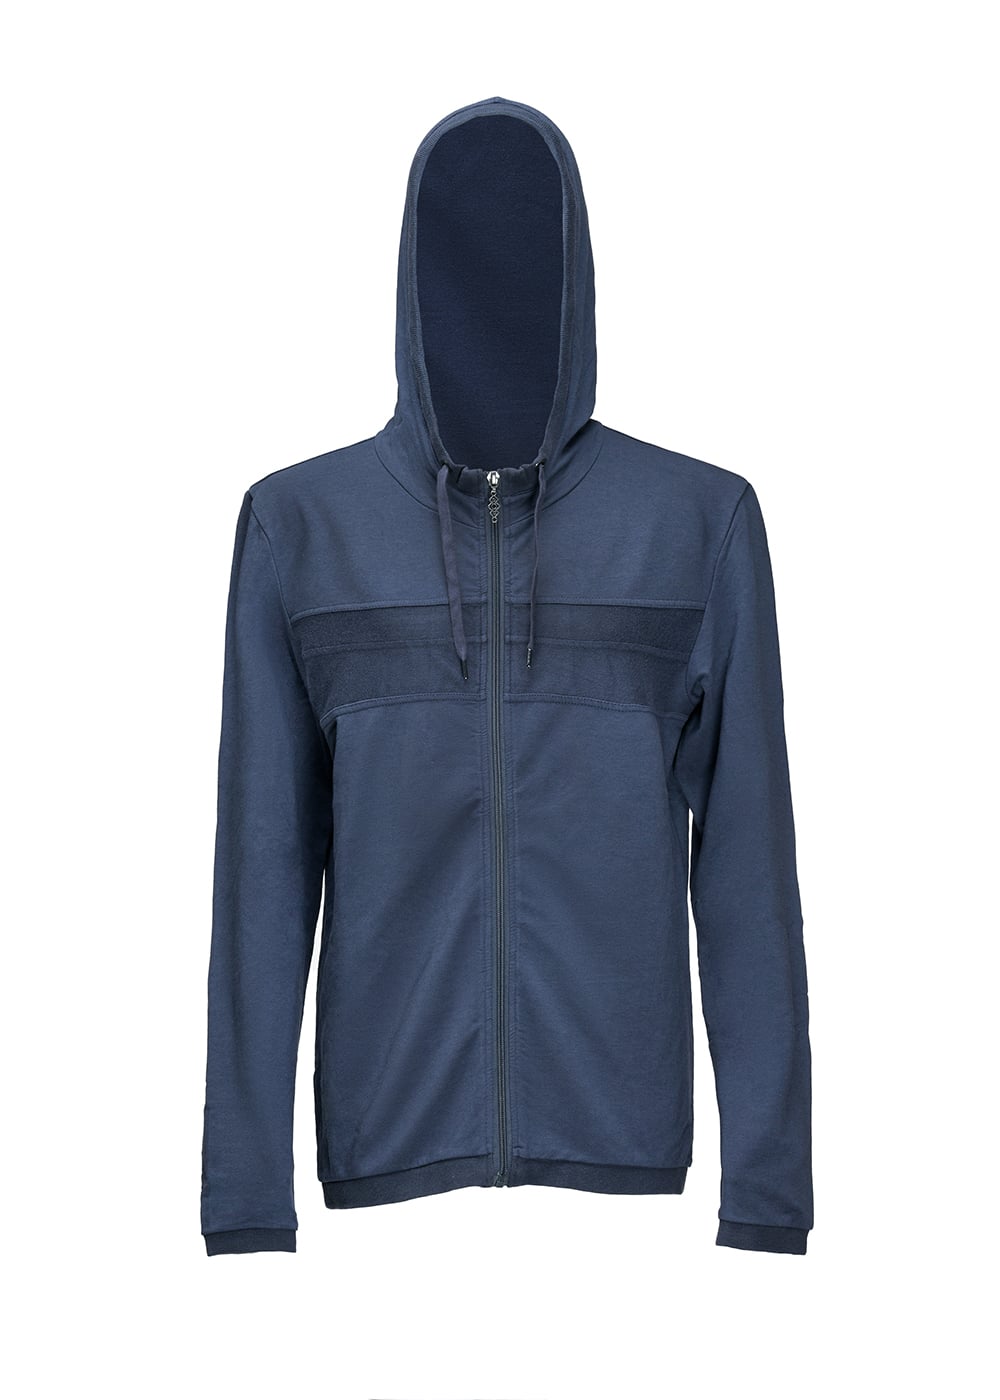 Nomads Hemp Wear mens horizon hoodie jumper made from ethical and sustainable bamboo and organic cotton fabric. Found at Tantrika Australia